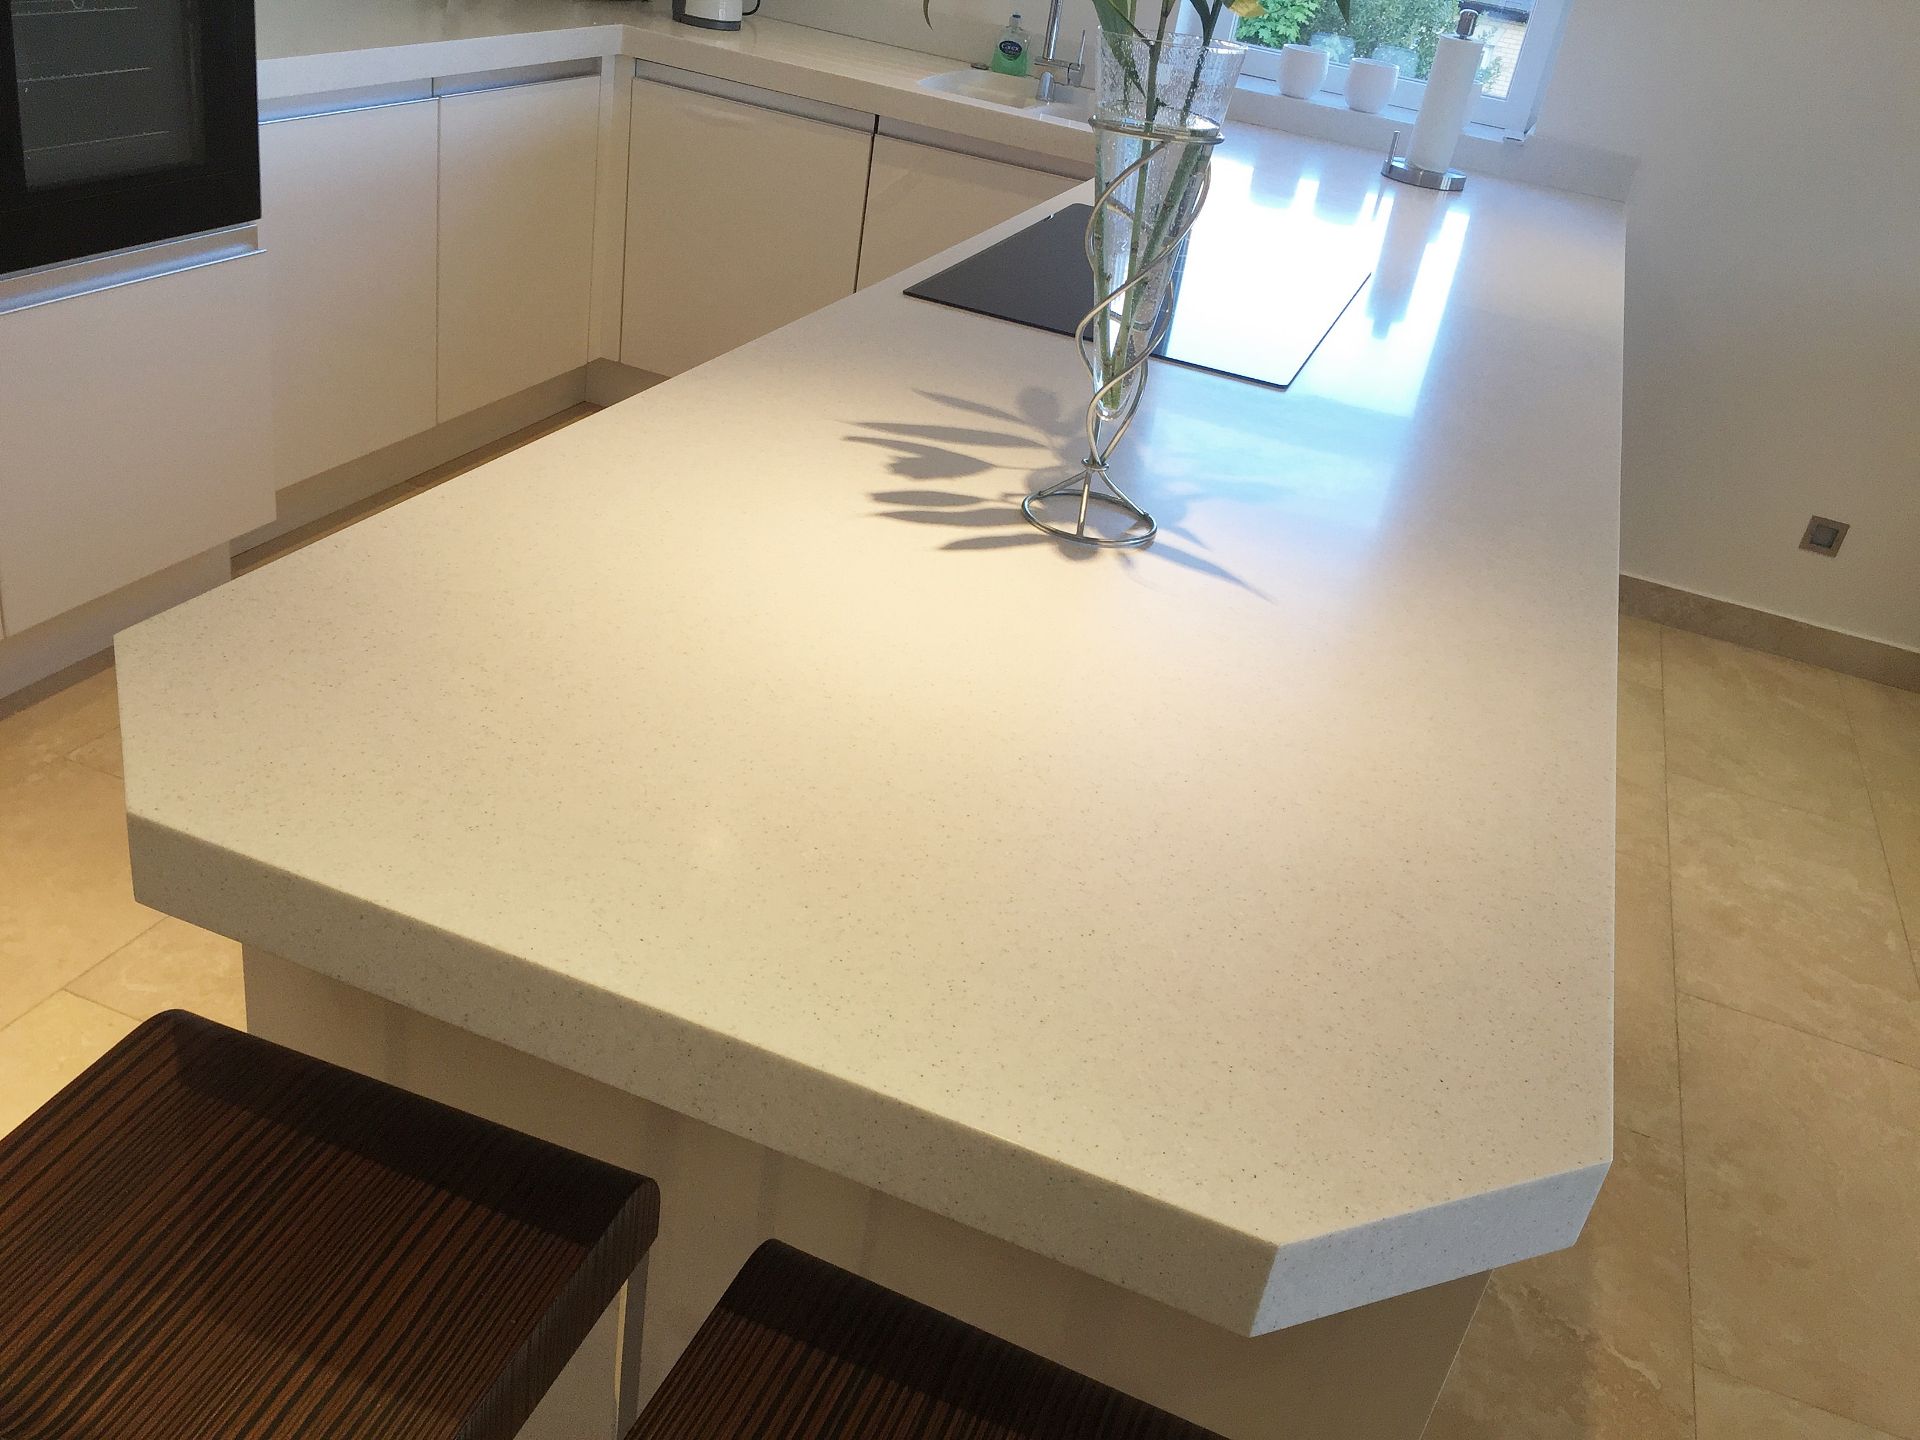 1 x Modern Gloss White Bespoke Fitted Kitchen By Johnson & Johnson - Features Integral Neff - Image 3 of 54